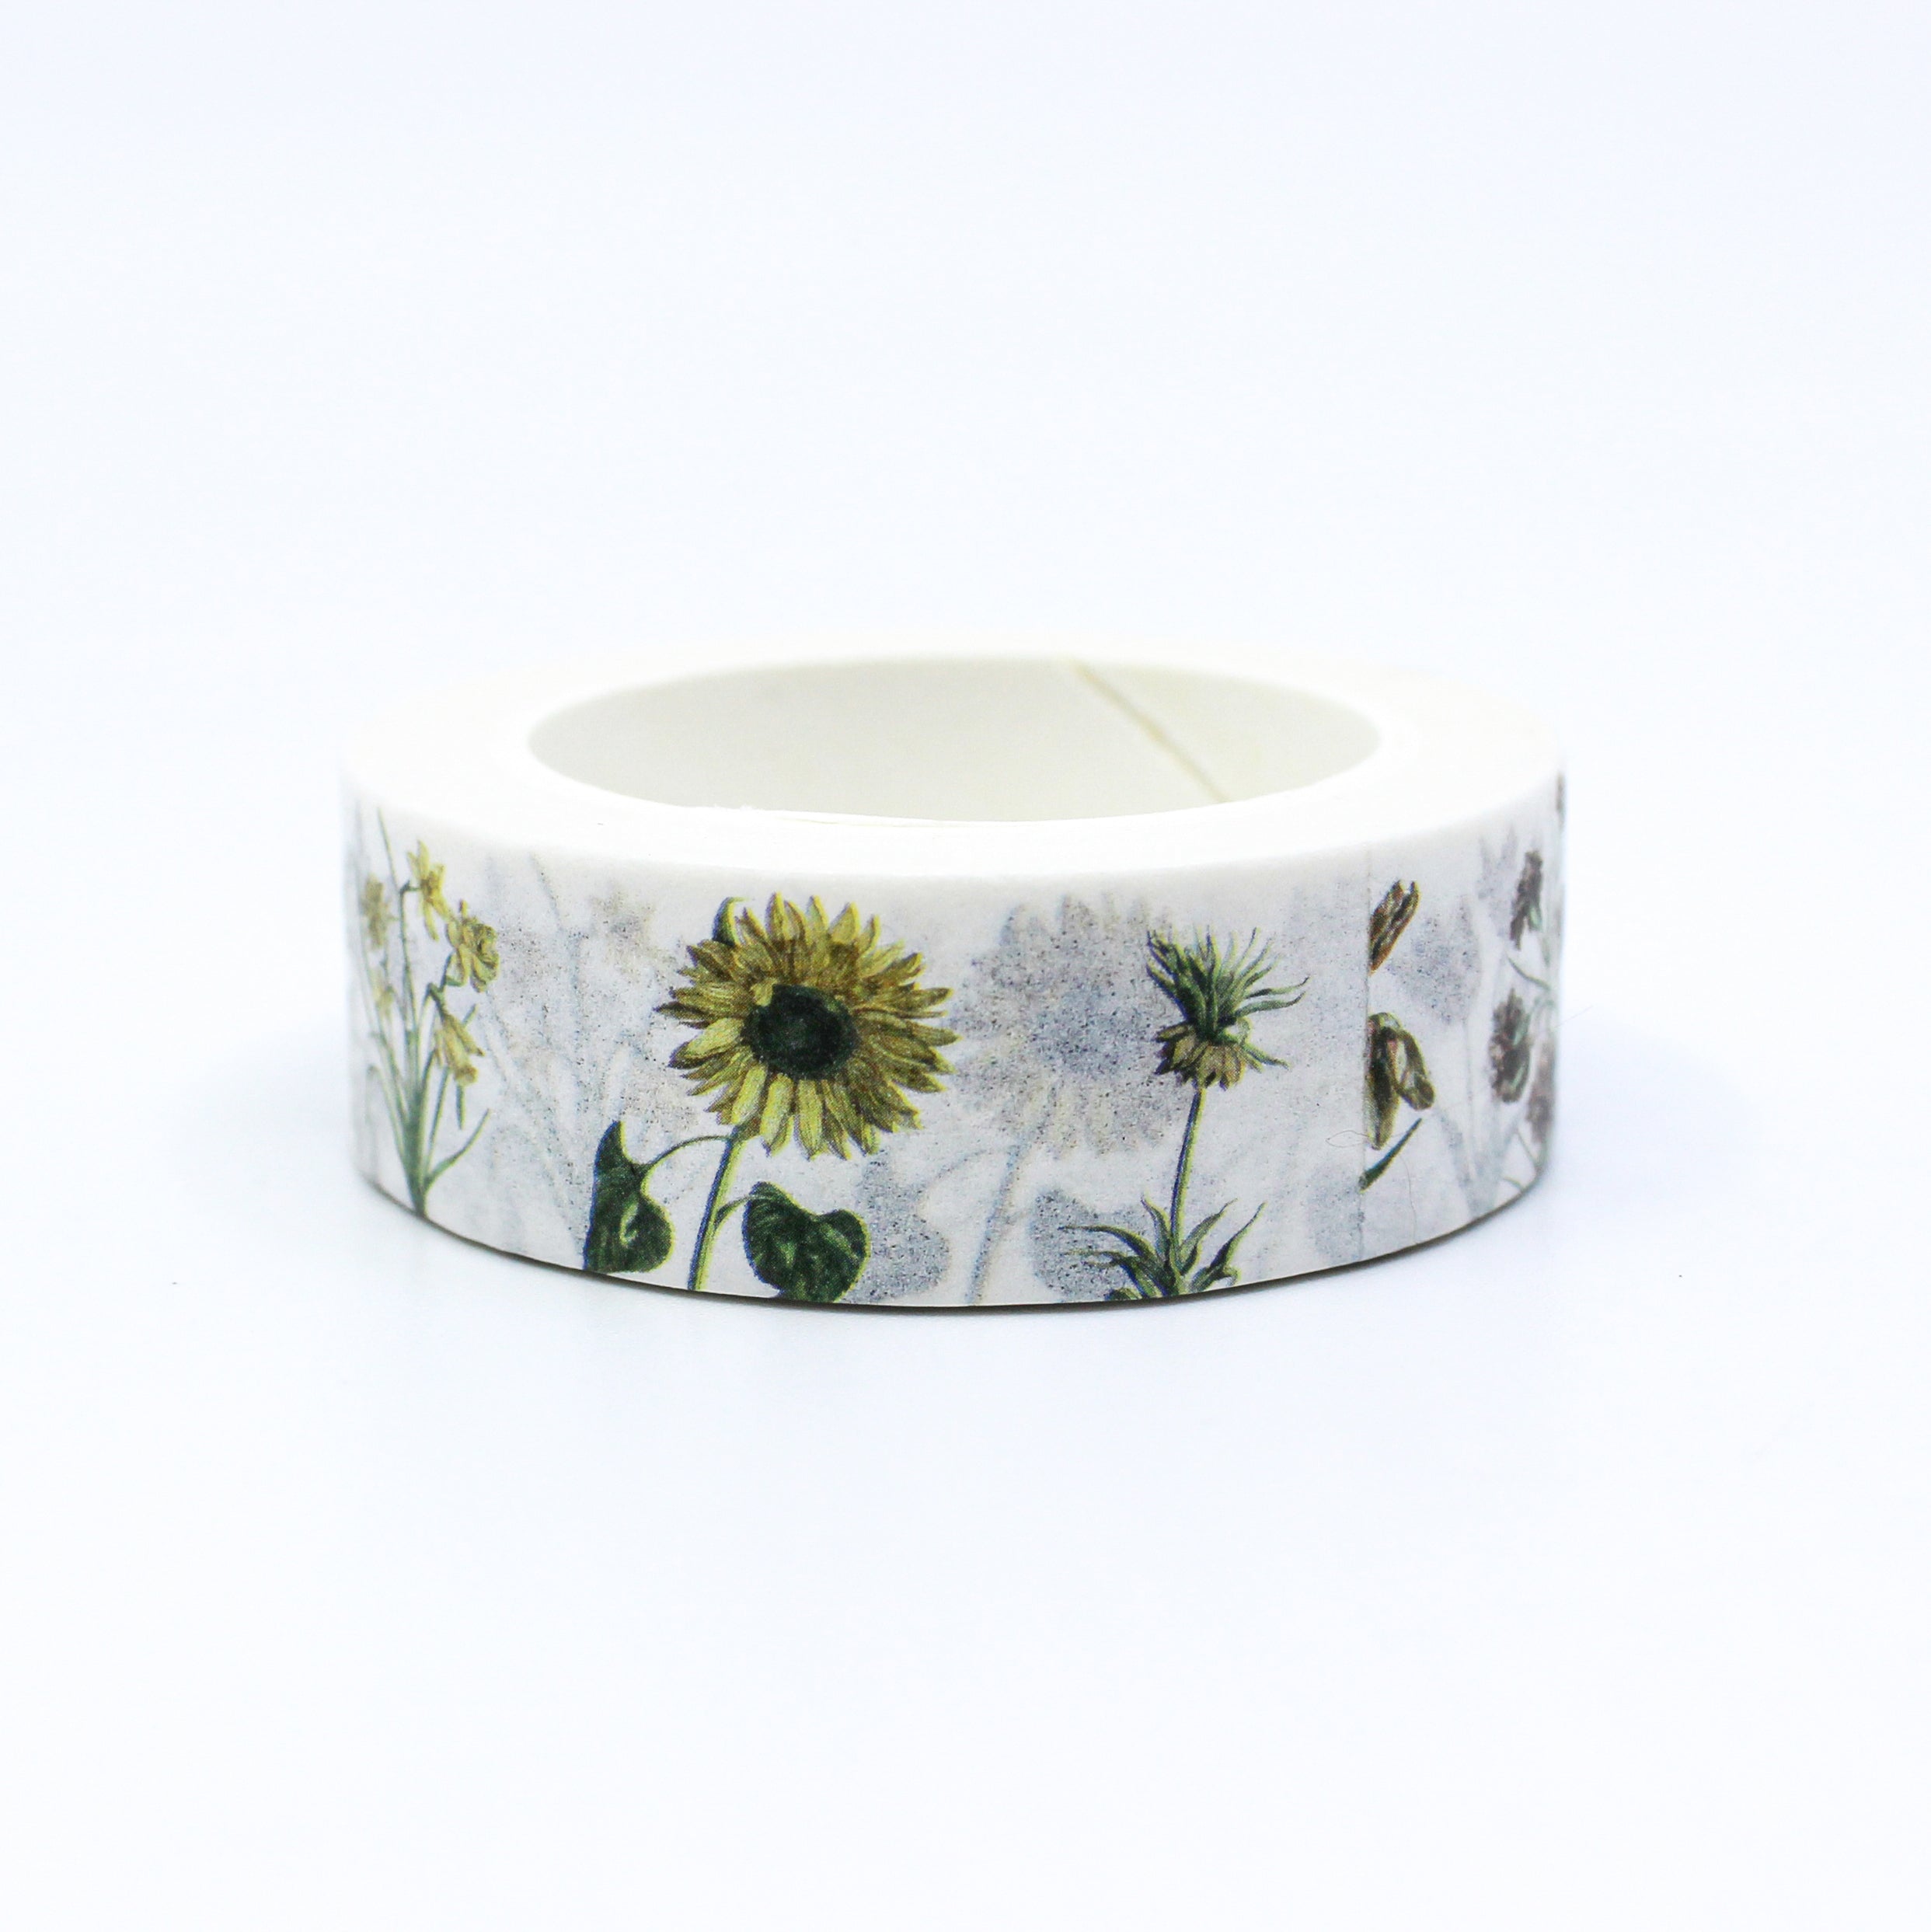 This is cute and simple botanical flowers washi tape from BBB Supplies Craft Shop